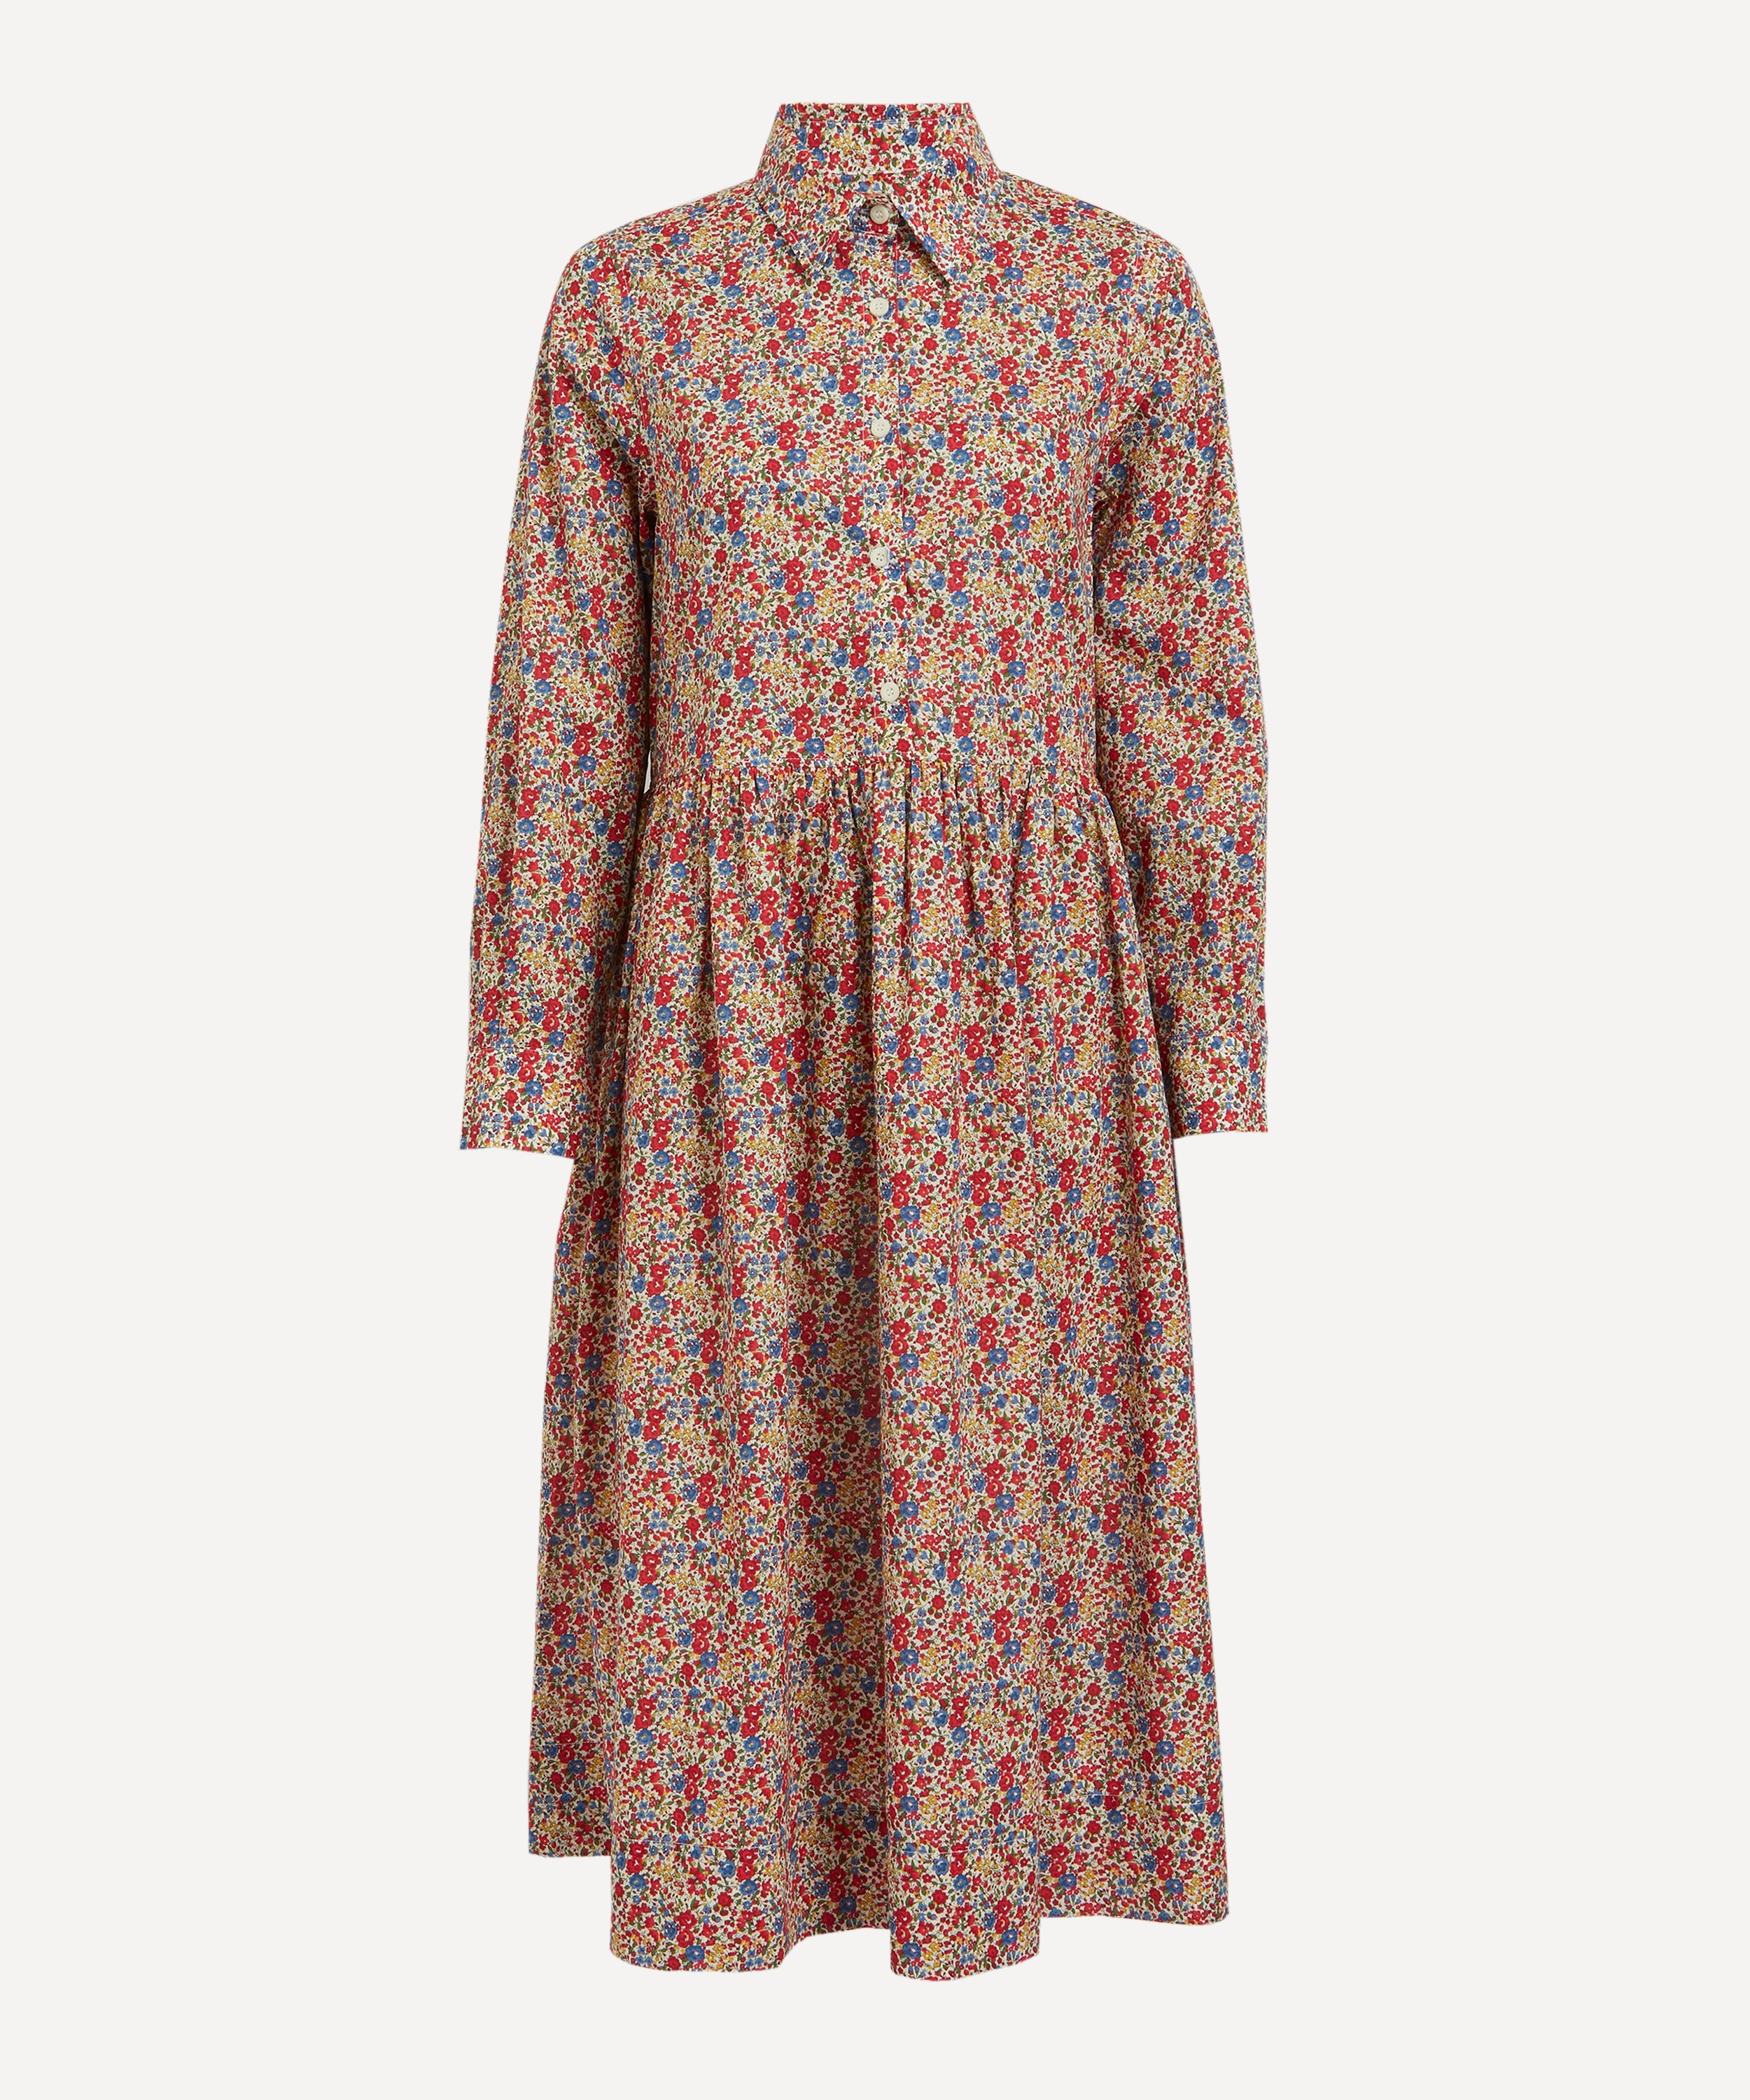 Floral Print Long Sleeve Dress in Tana Lawn Cotton/liberty of